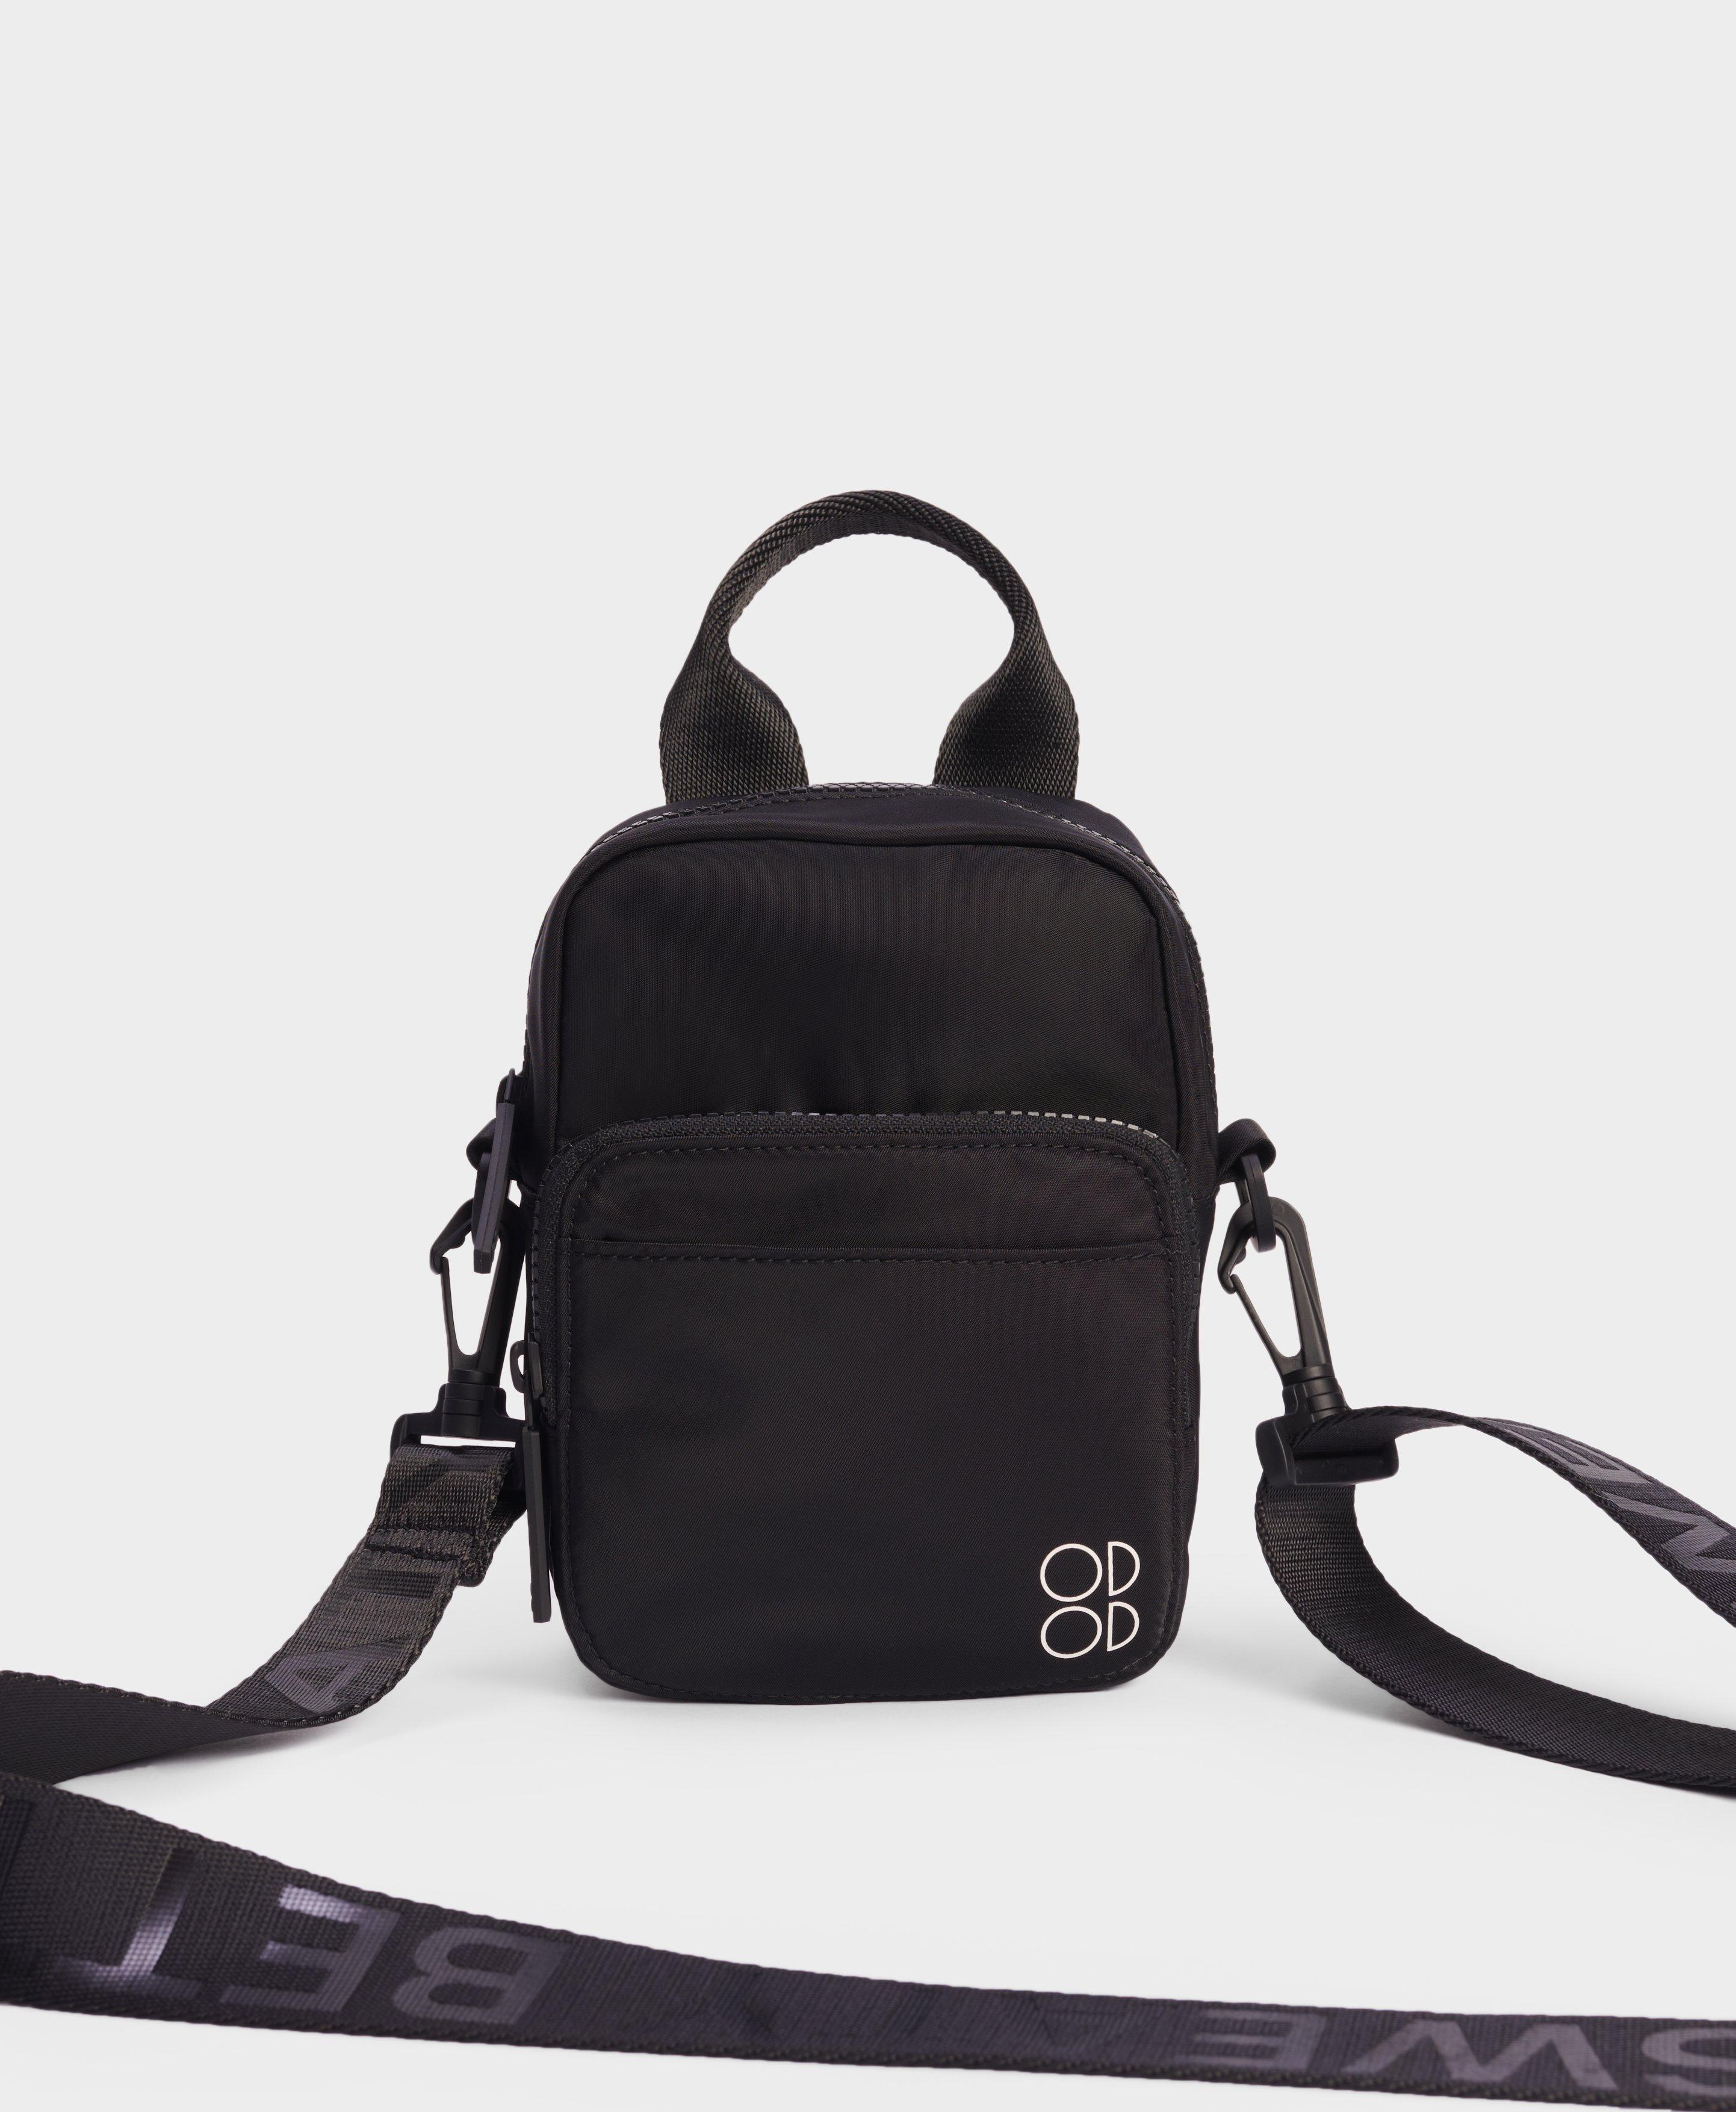 Off White Messenger Bags - Buy Off White Messenger Bags online in India